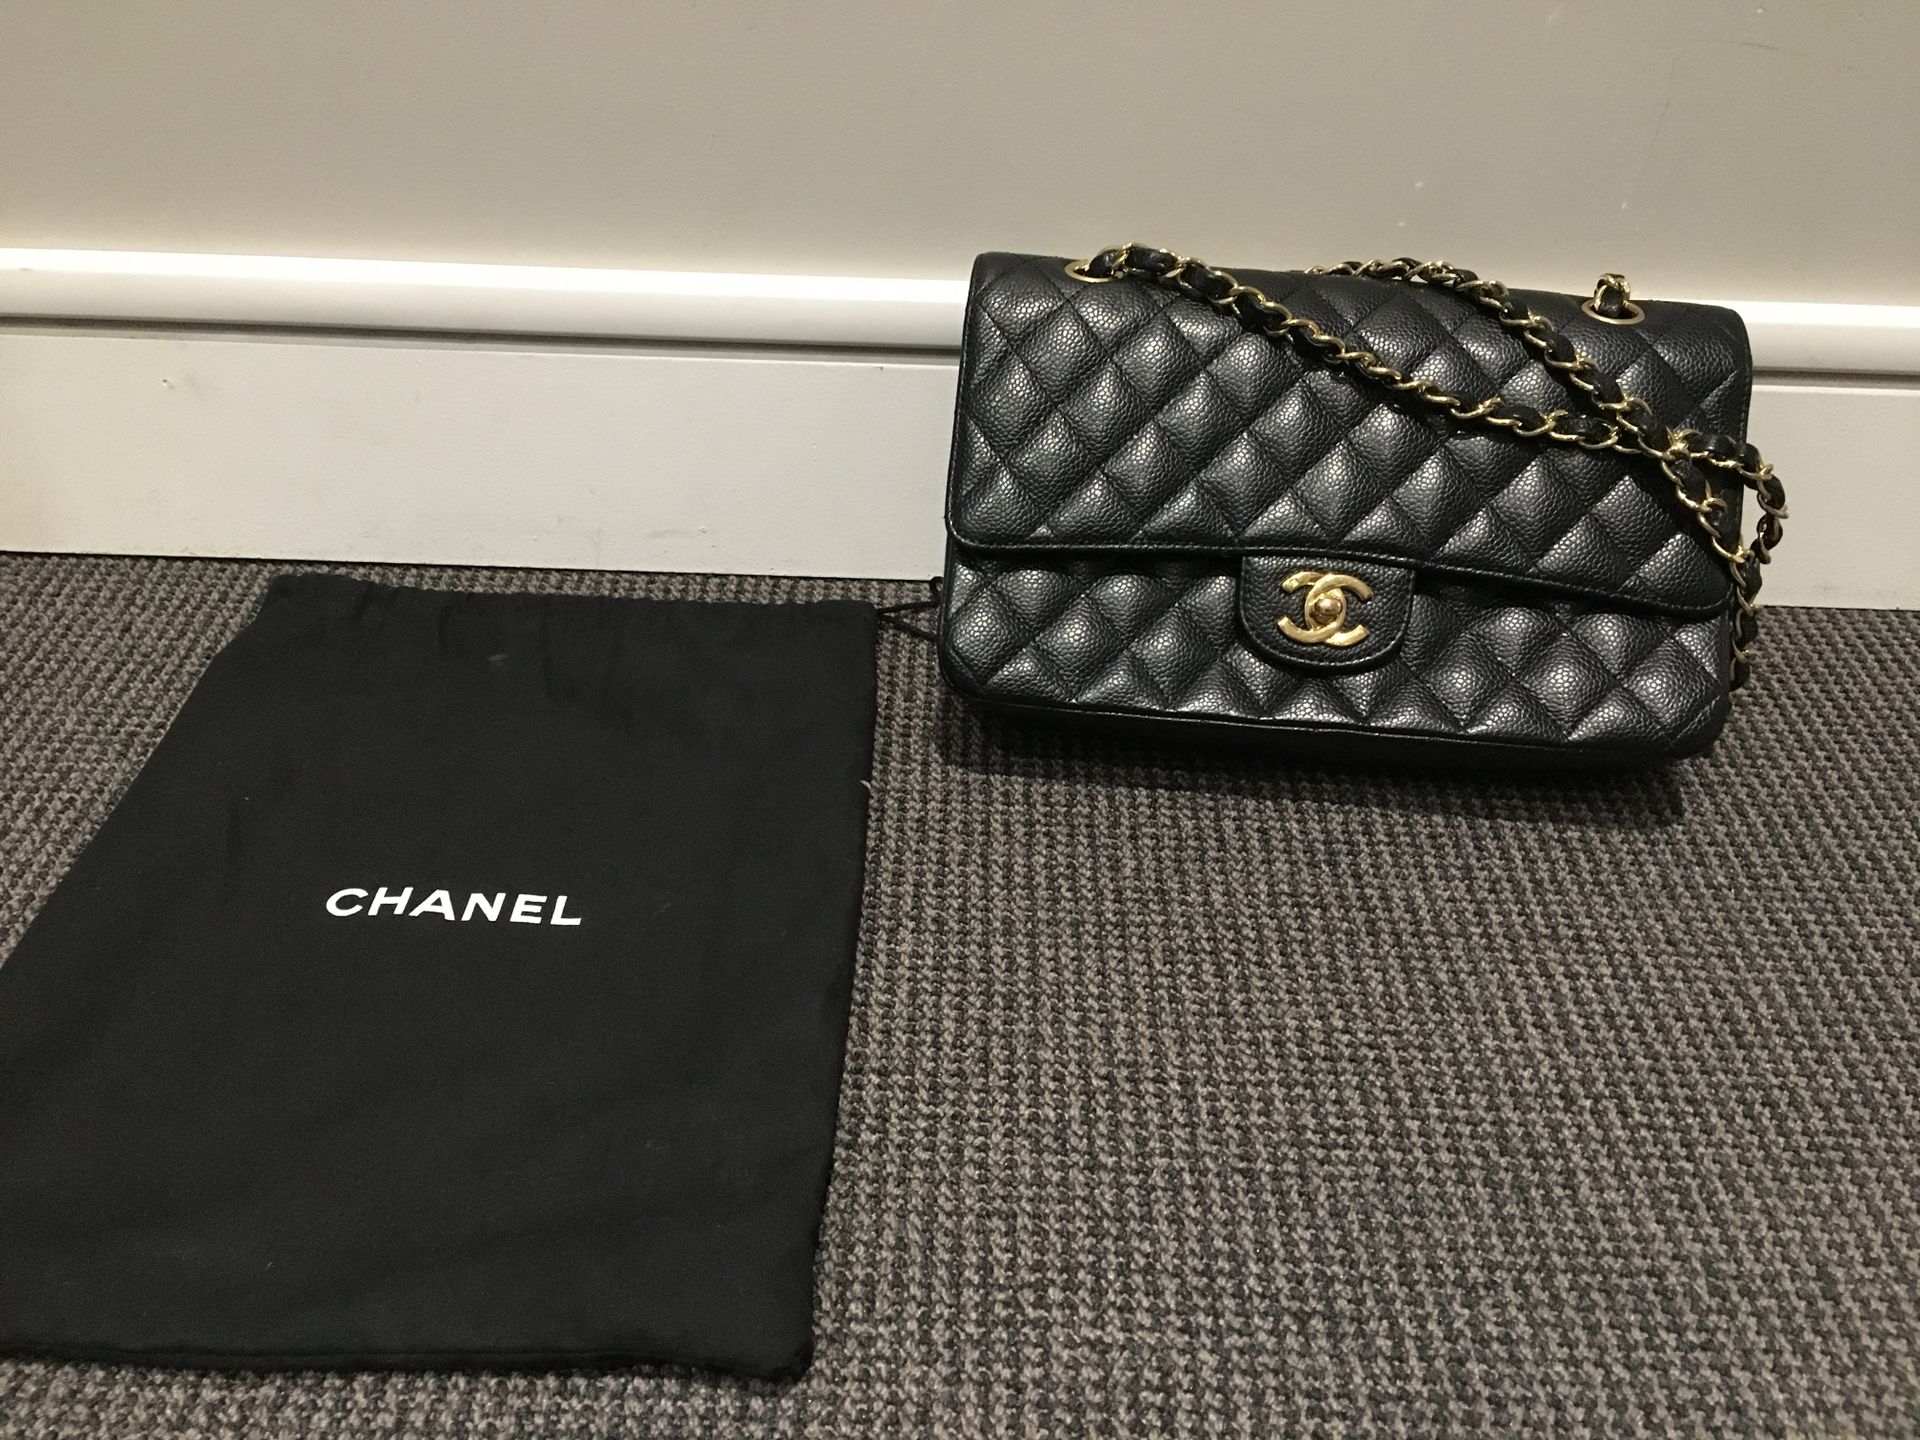 CHANEL, circa 2008 
Classic black quilted caviar leather "Timeless" bag, gold me&hellip;